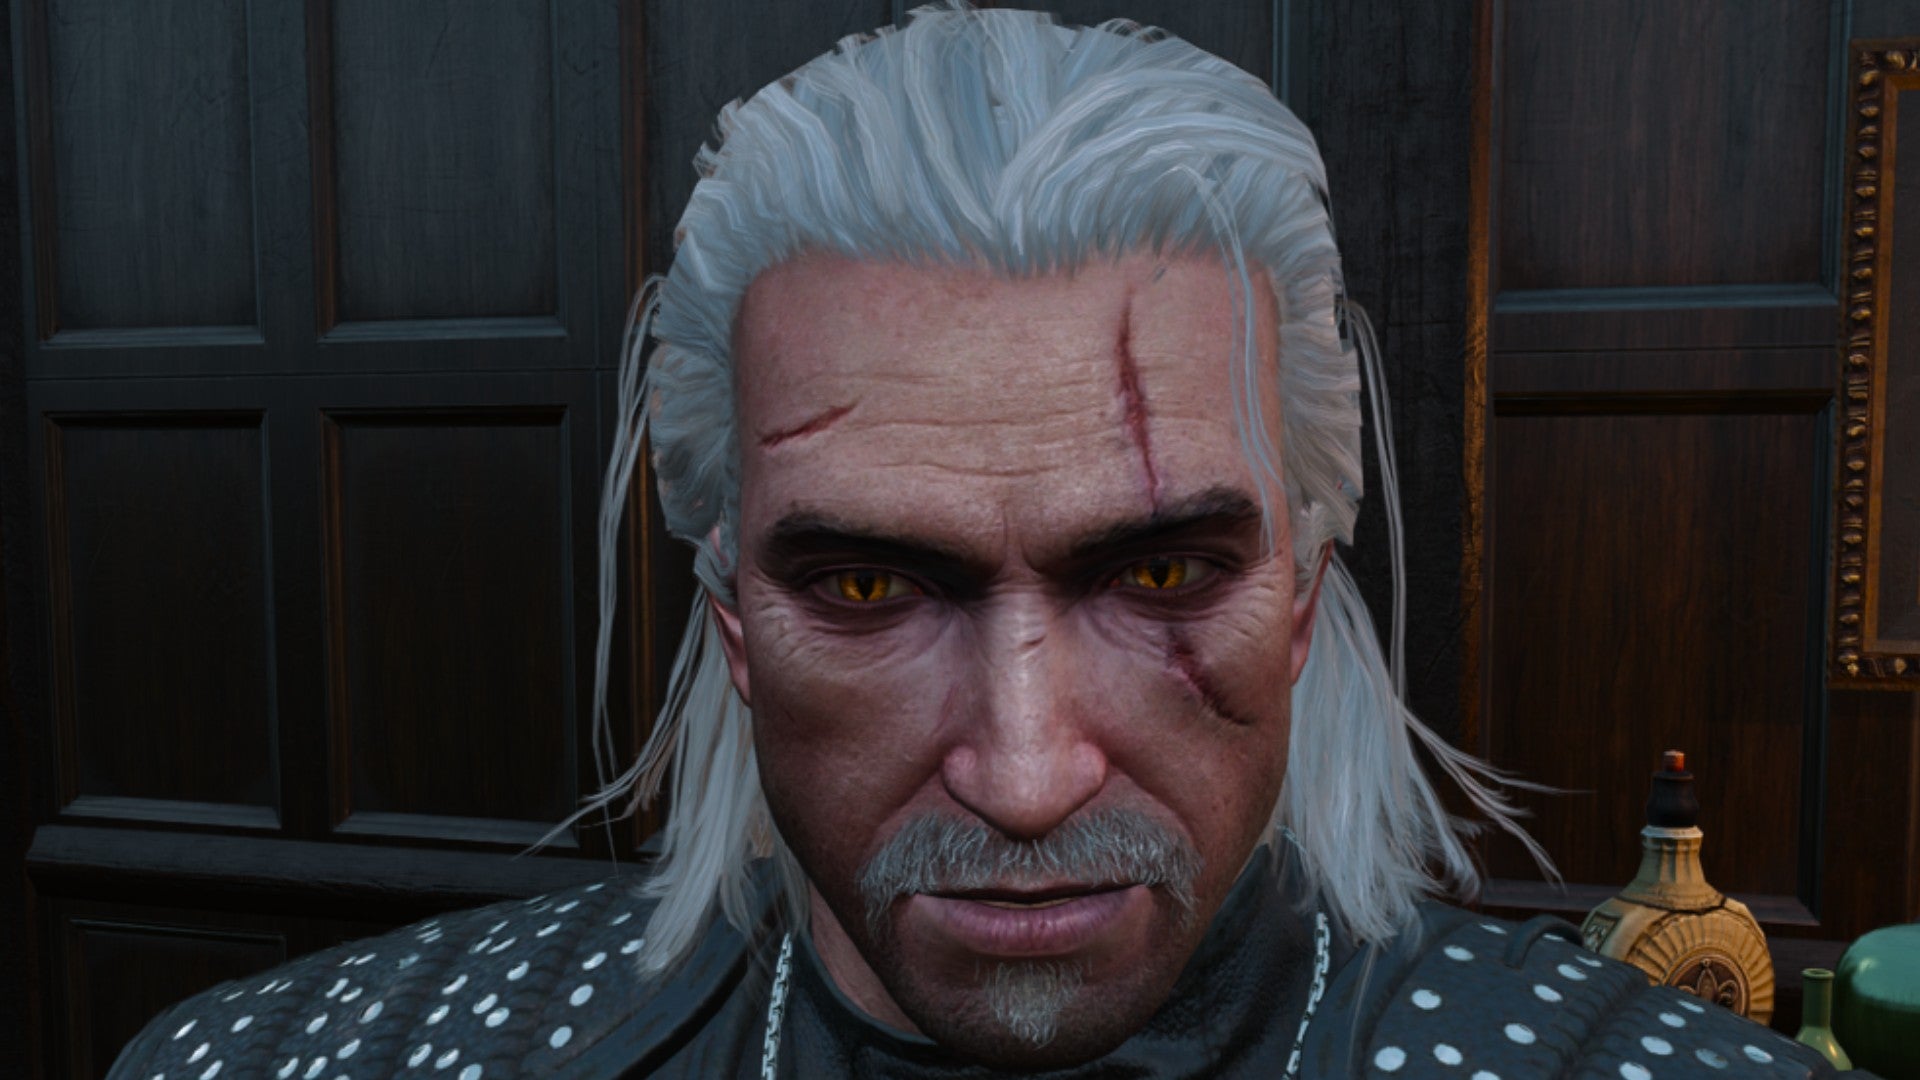 Witcher 3 image showing Geralt with a moustache and a soul patch.